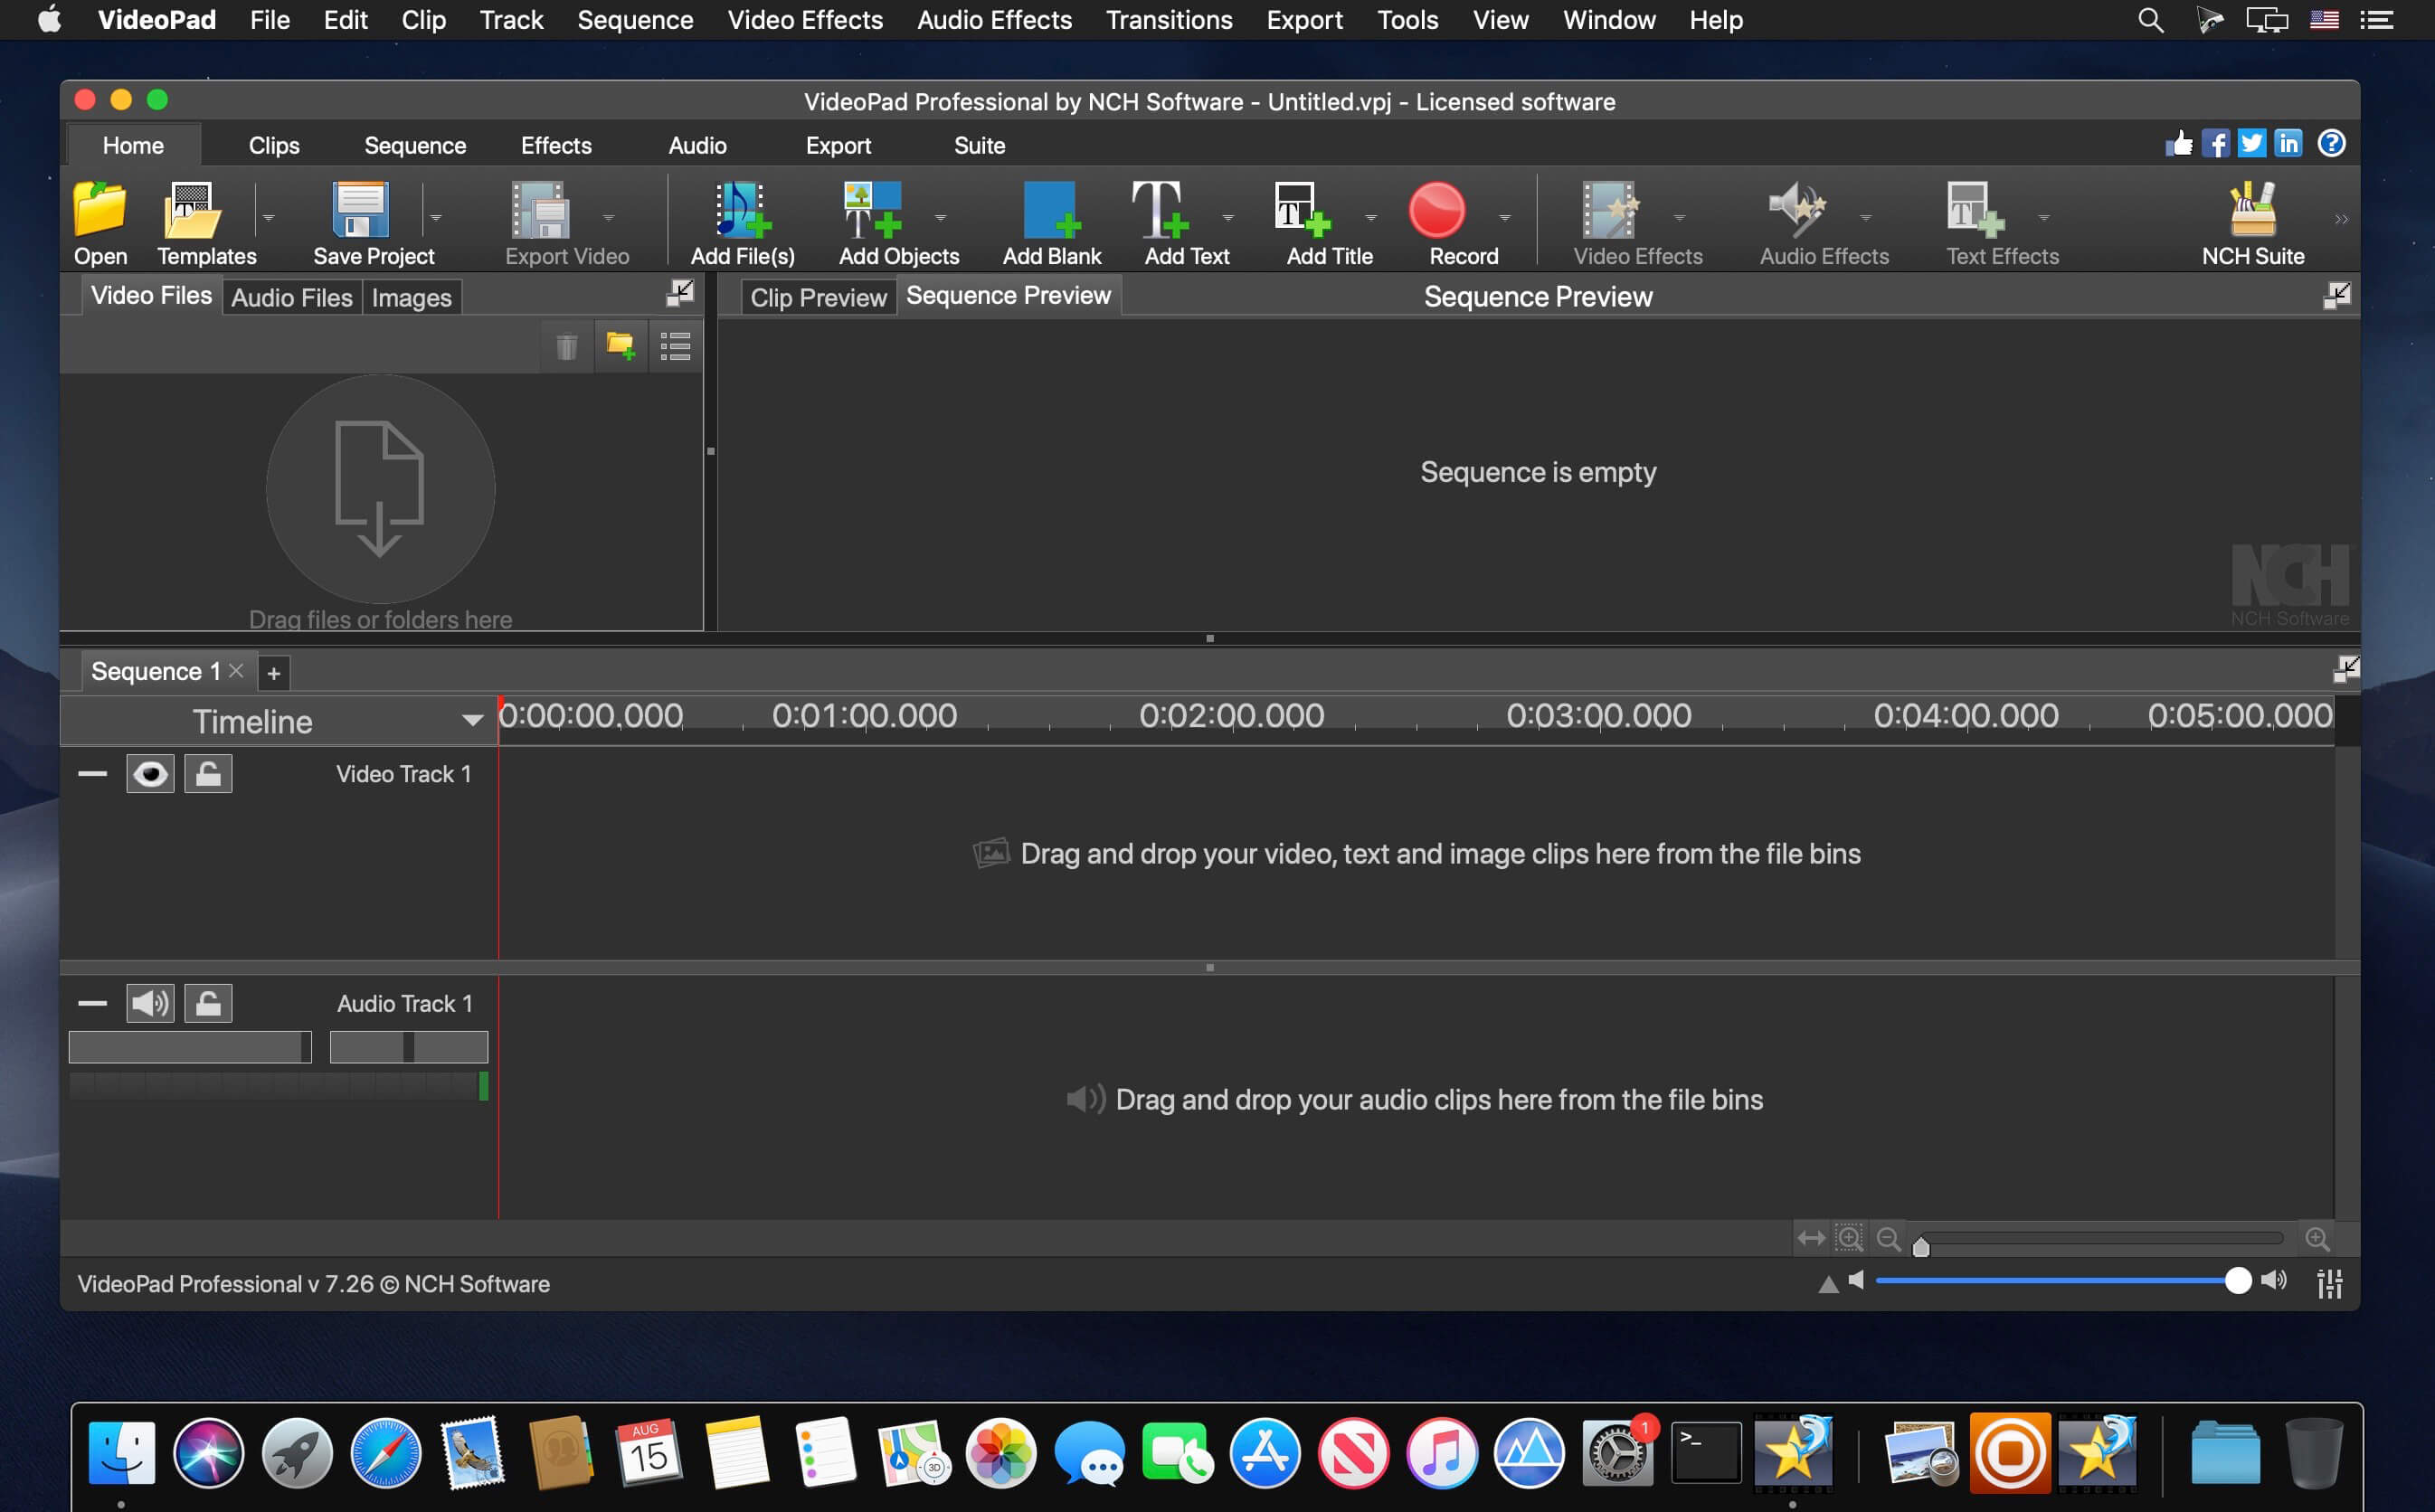 for android download NCH VideoPad Video Editor Pro 13.51